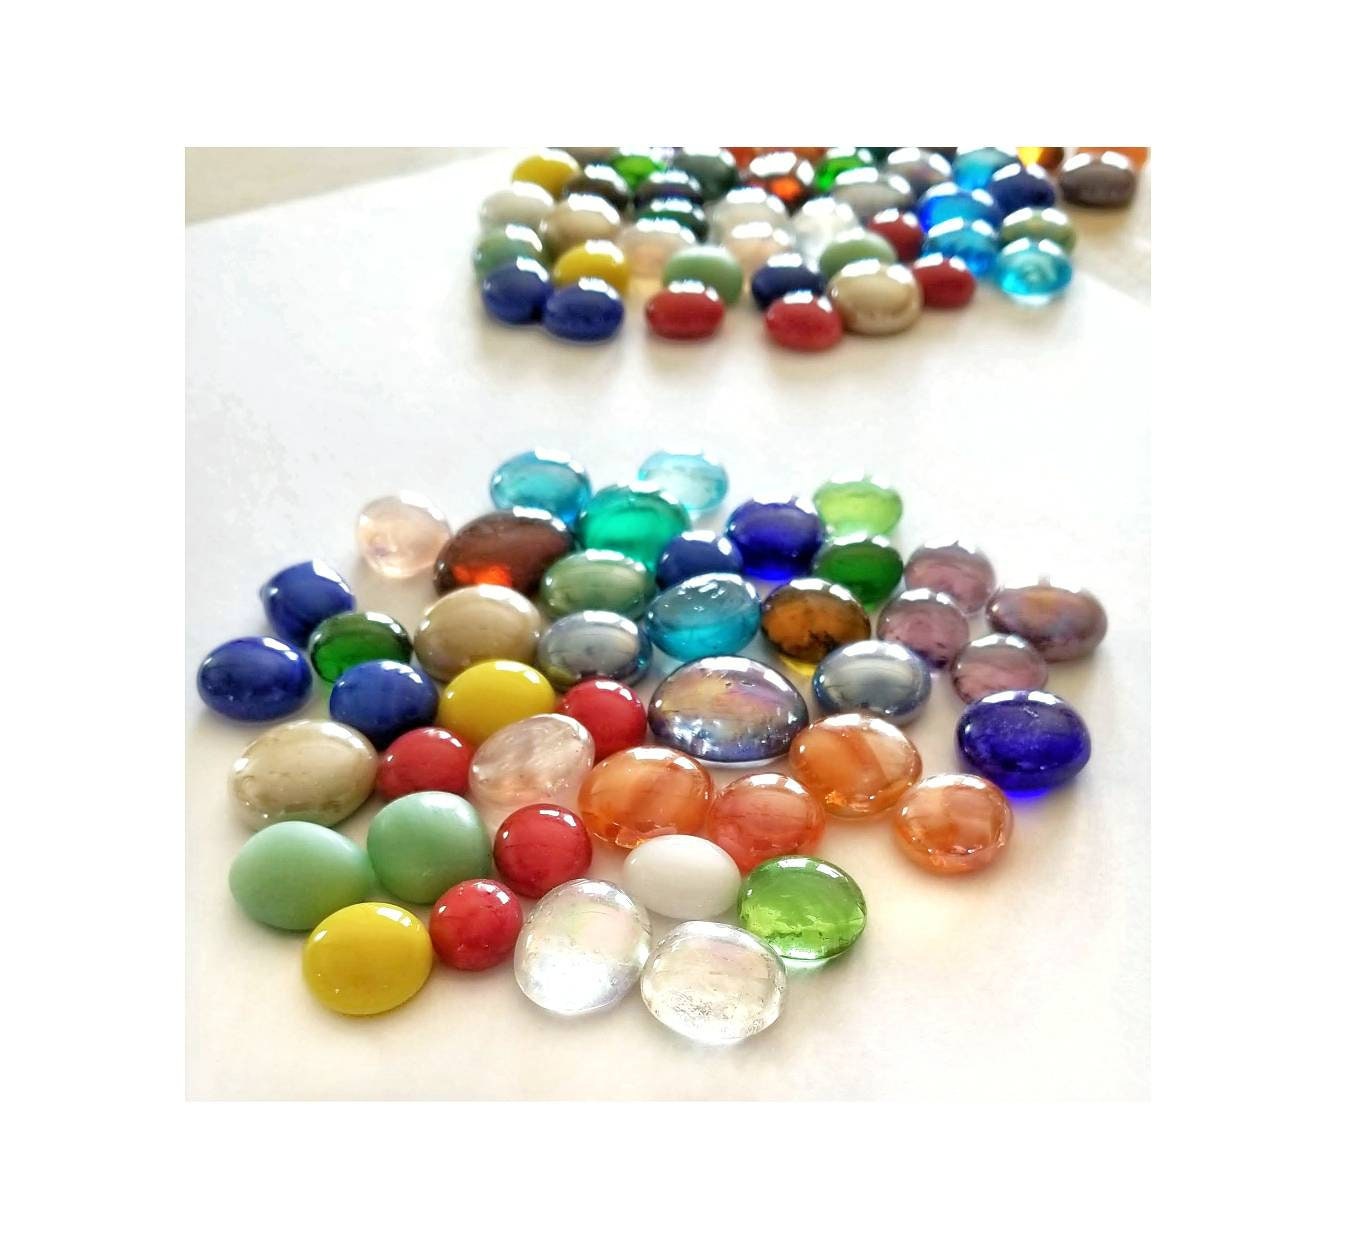 Glass Gems for Stained Glass/Jewelry Making Supply/Kids Teen Craft Projects. Assorted Colors, Iridescents. Average Size Medium